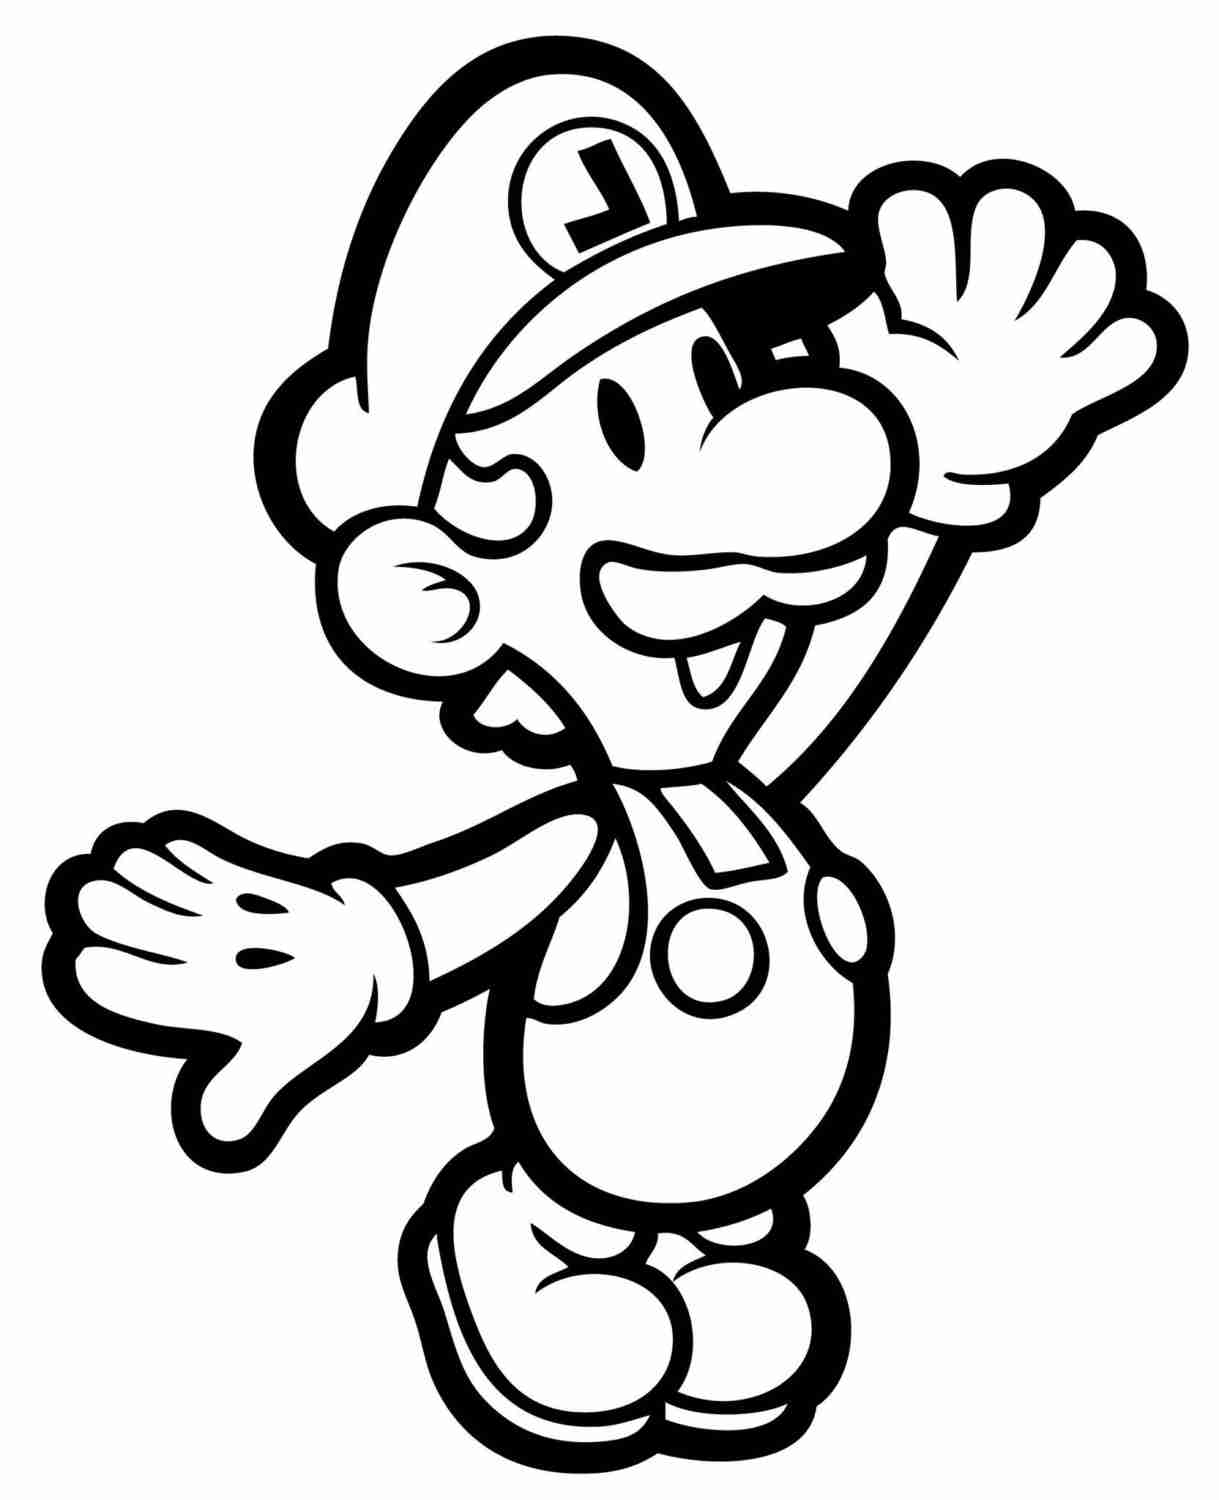 Super Paper Mario Coloring Pages at GetDrawings Free download